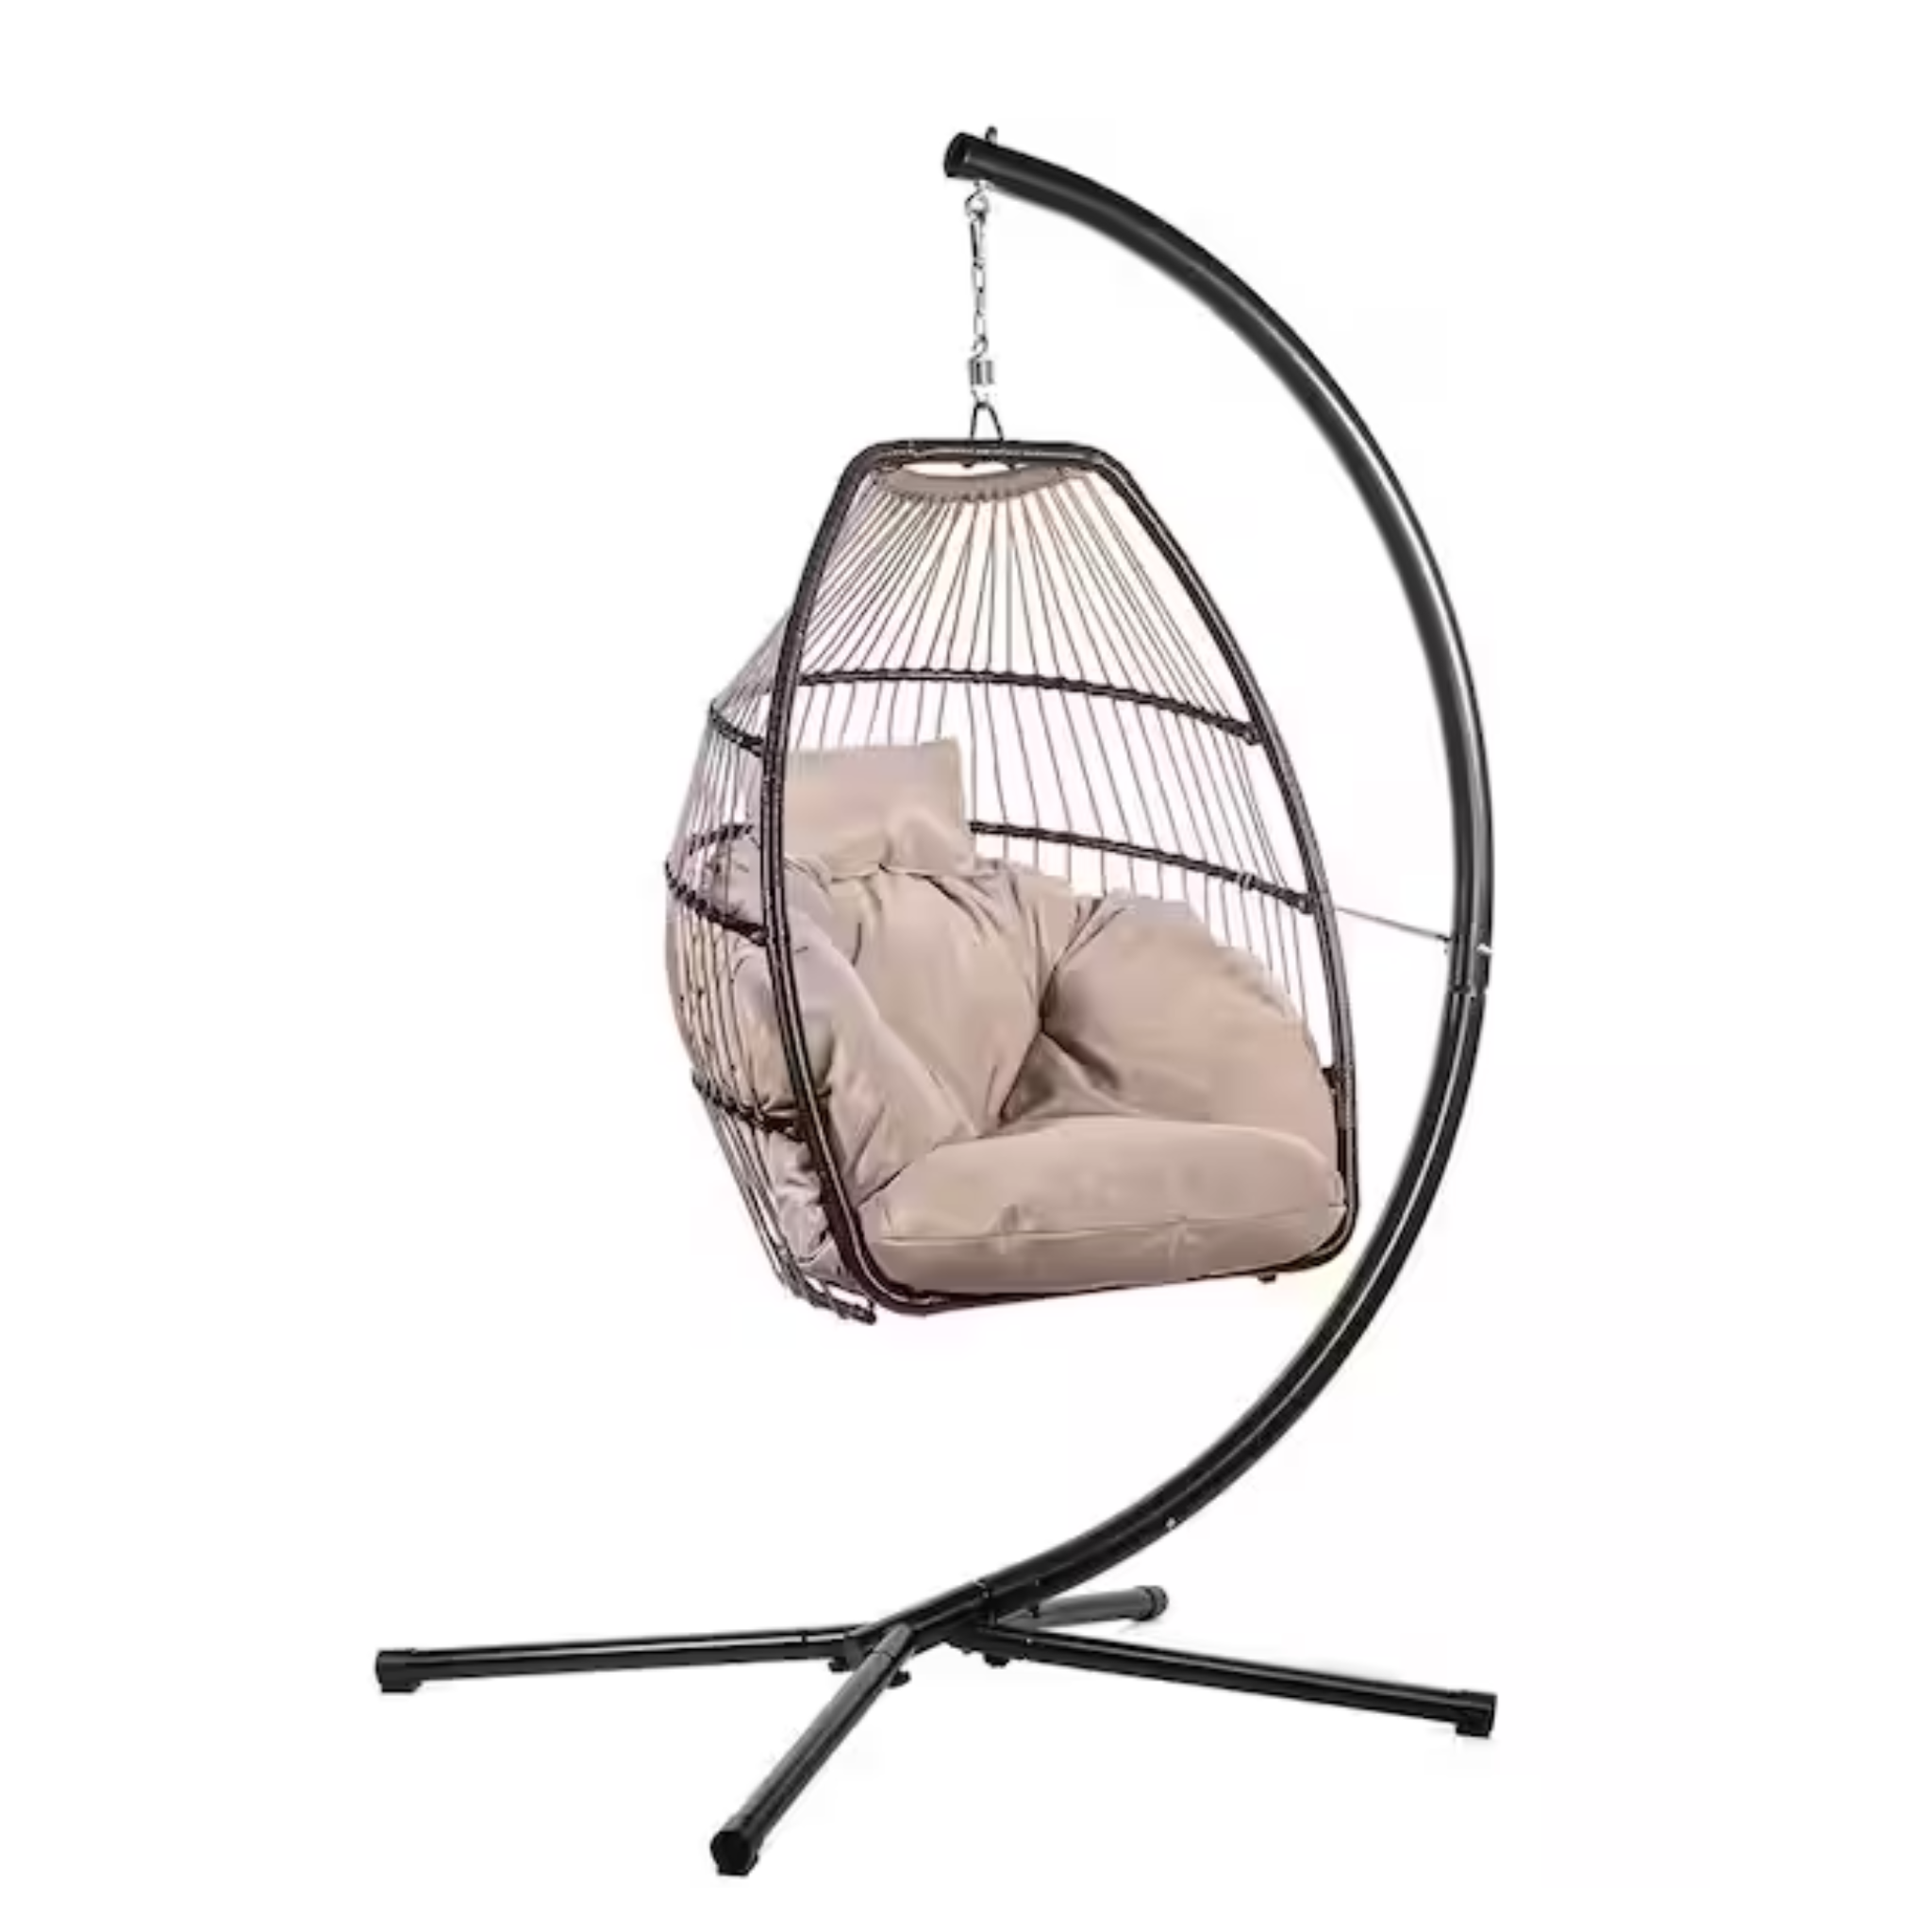 Black Wicker Egg-Shaped Patio Swing Chair with Cushion